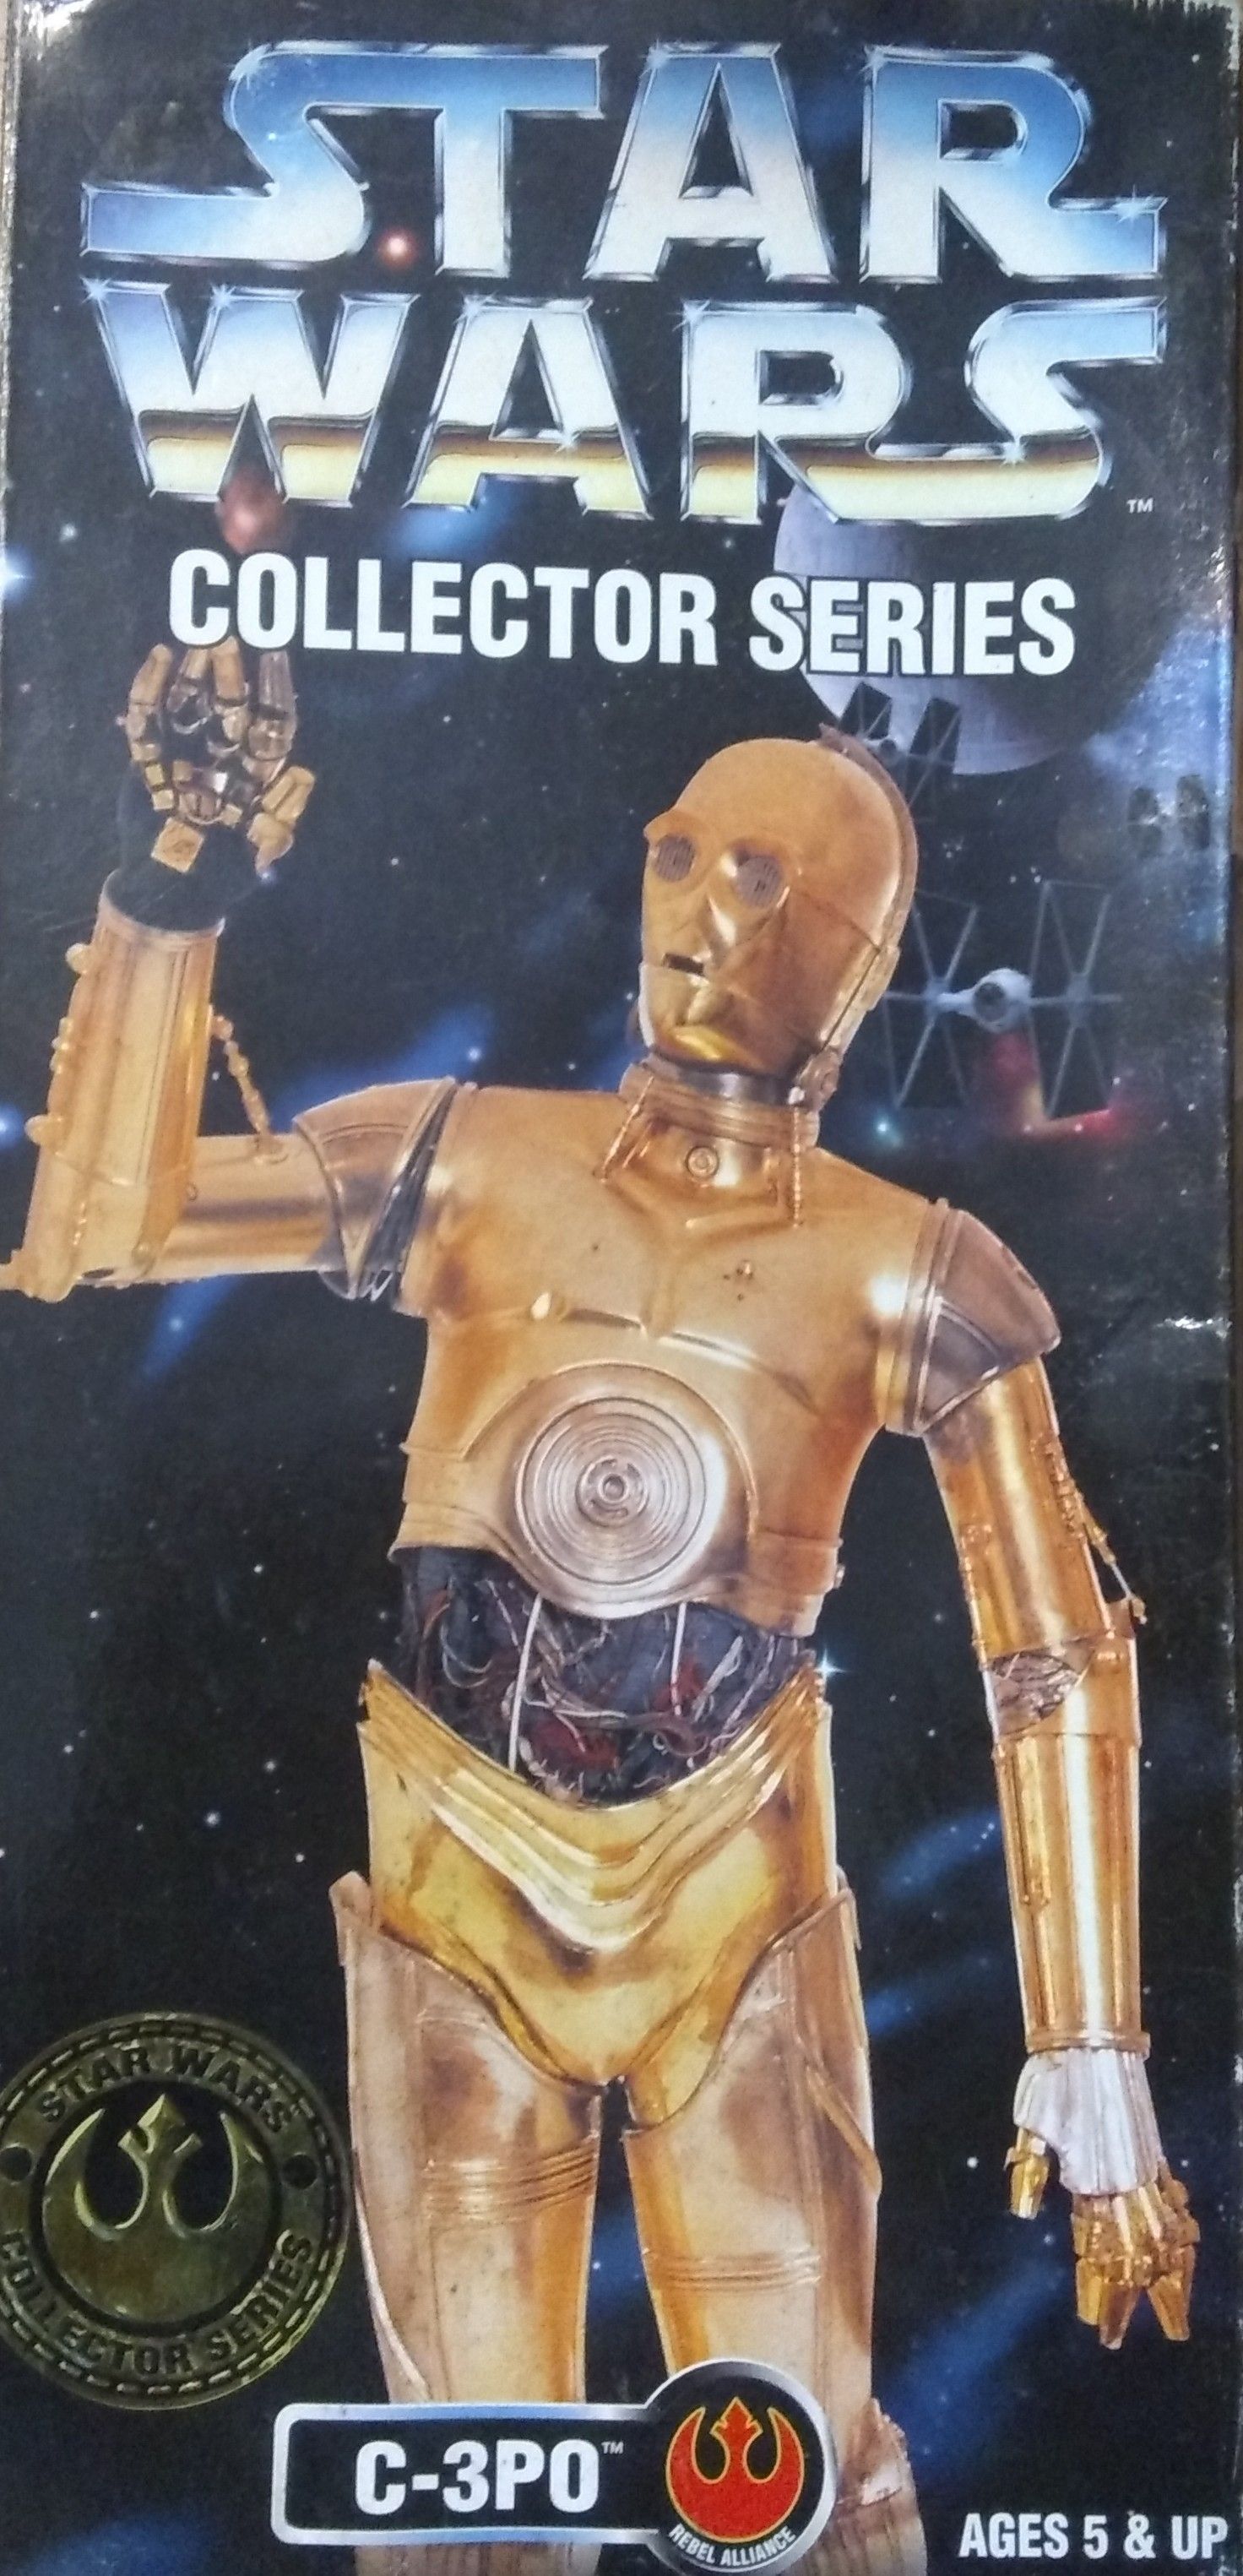 Star wars C-3PO collector series from 1997 12 in